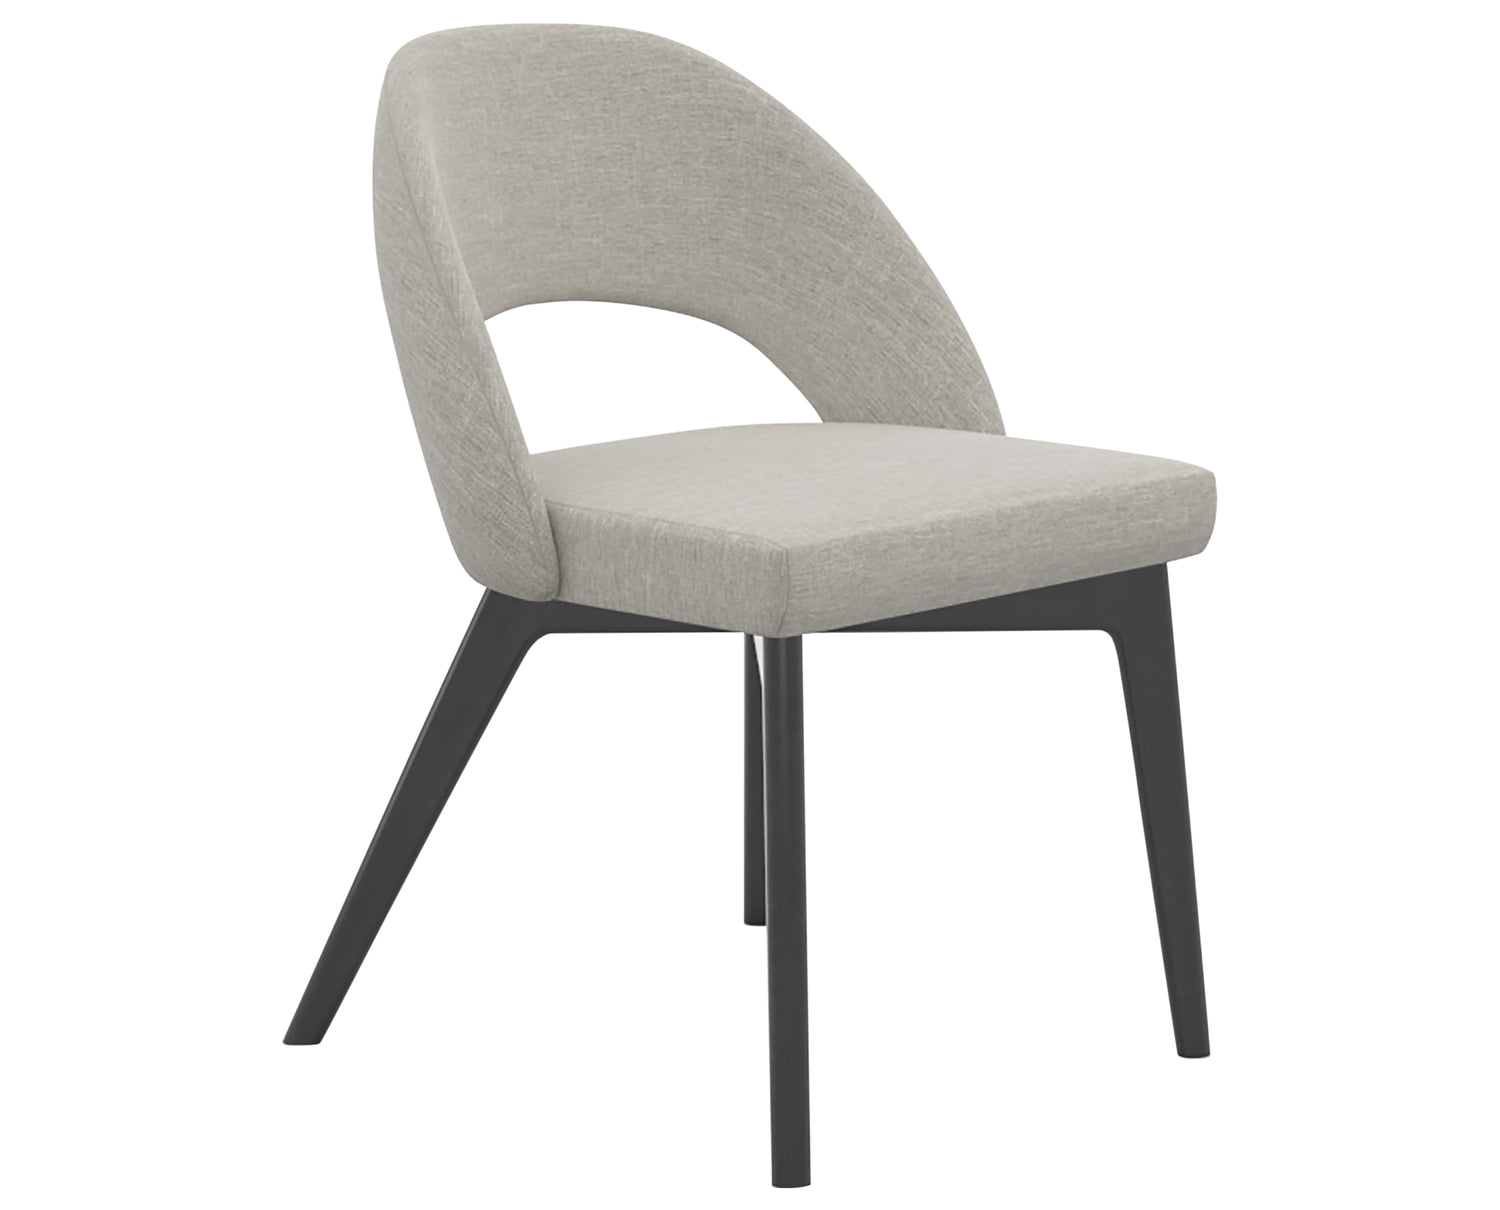 Peppercorn Washed & Fabric TB | Canadel Downtown Dining Chair 5140 | Valley Ridge Furniture